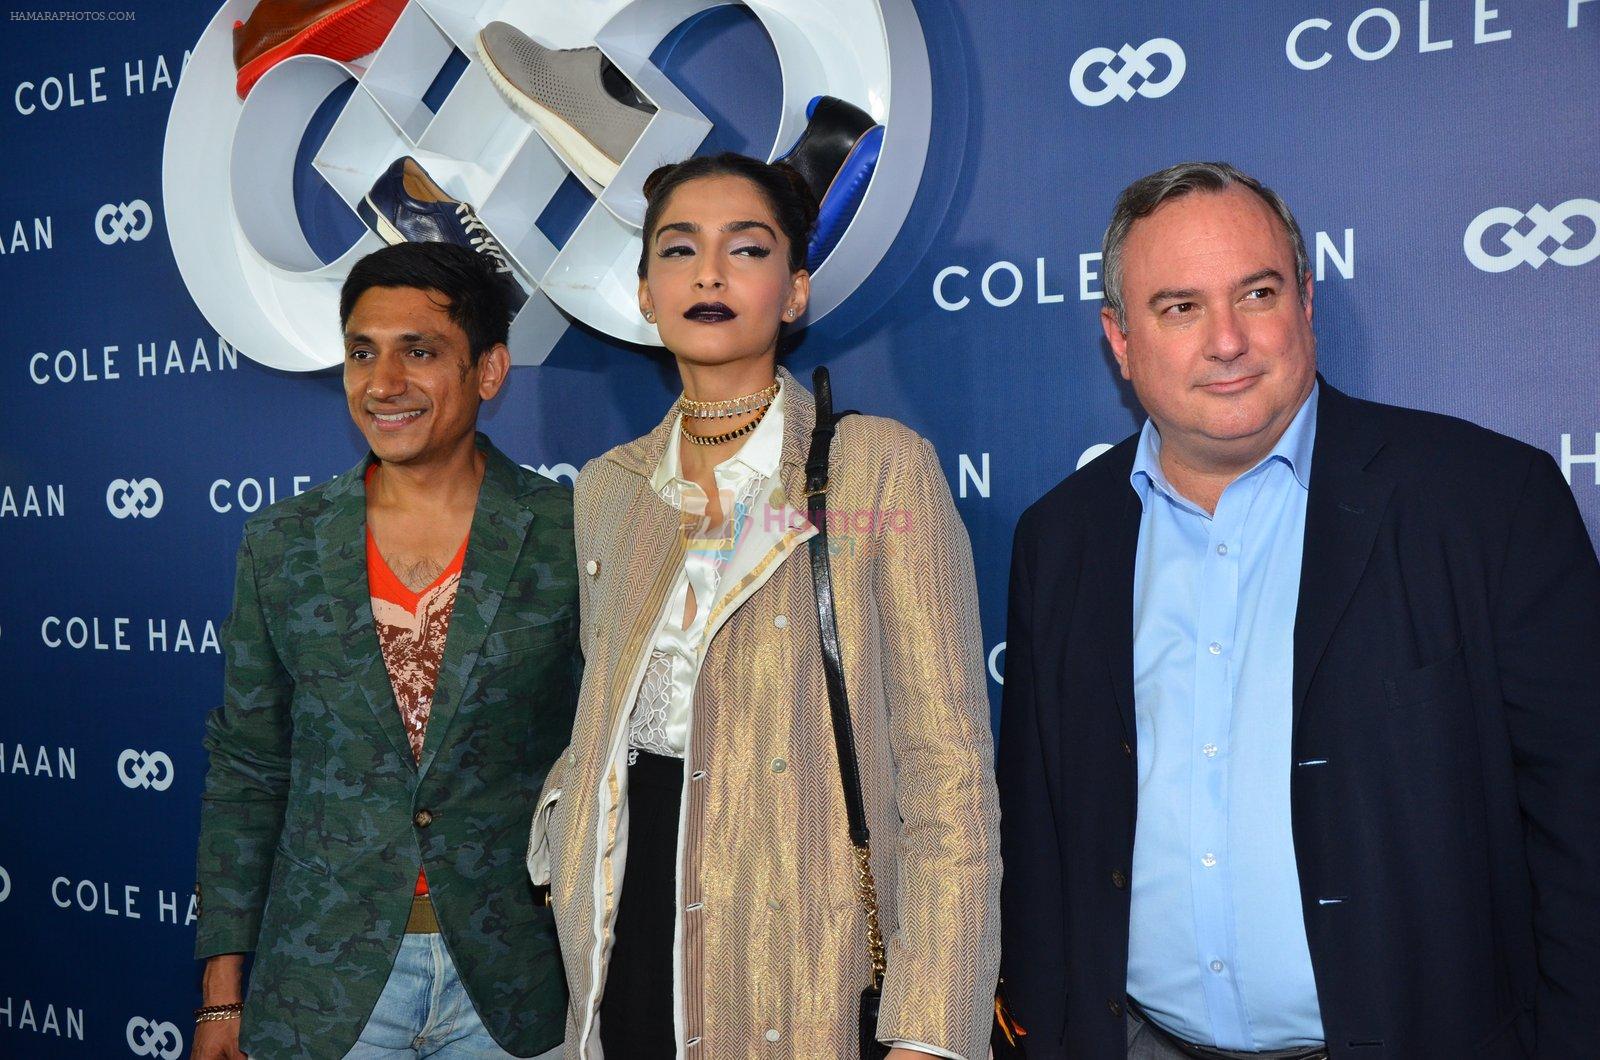 Sonam Kapoor at the launch of Cole Haan in India on 26th Aug 2016